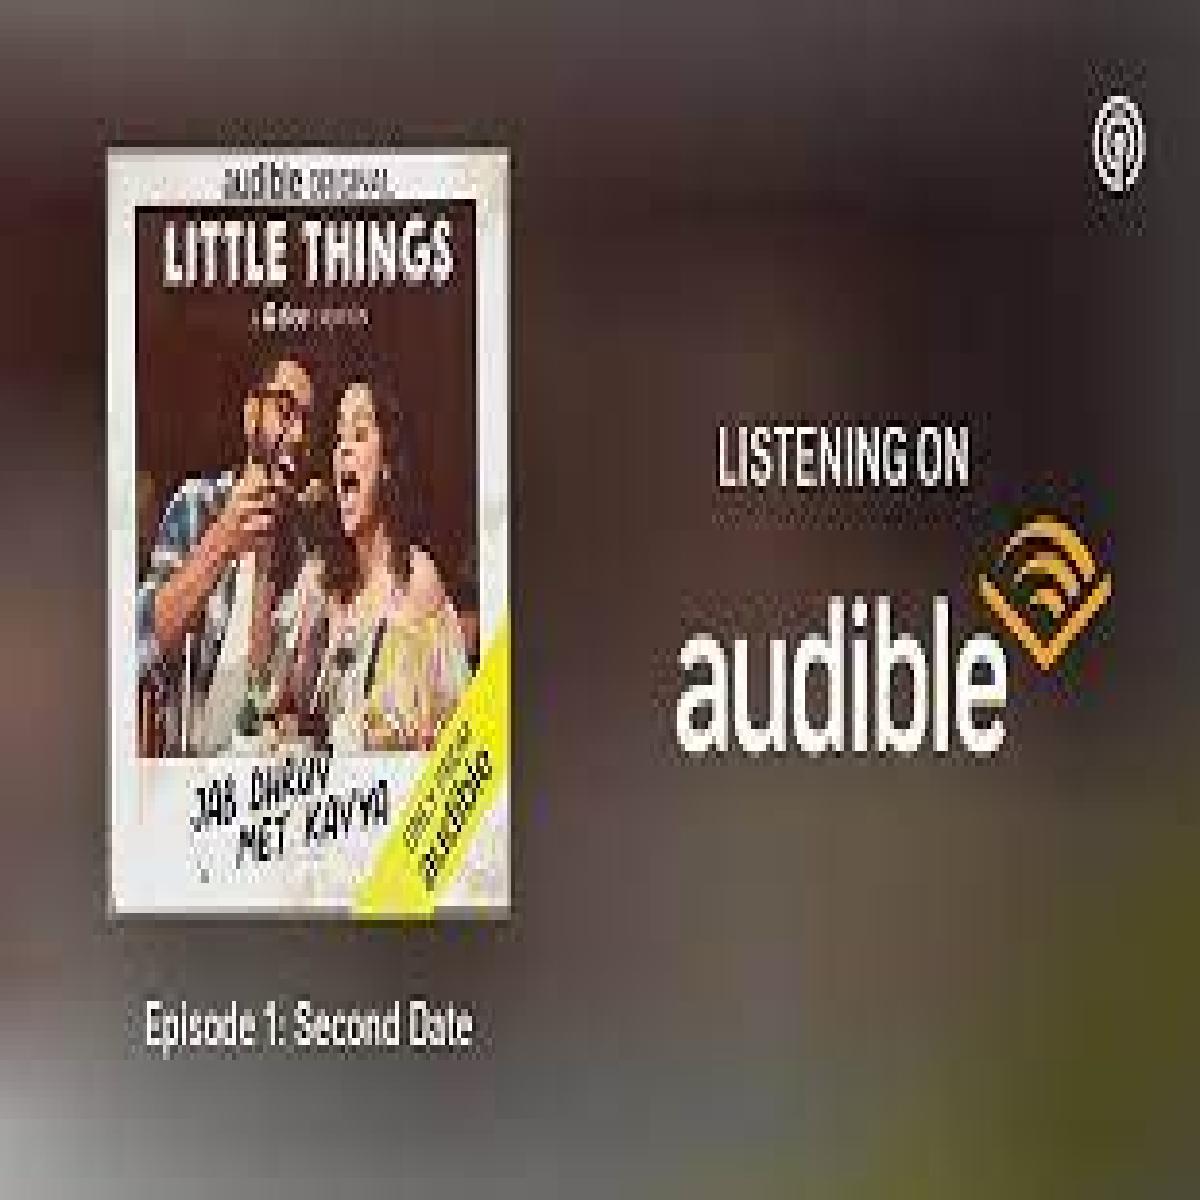 Little Things: When Dhruv Met Kavya, Tops the List for The Most Played New Release Podcast in India Based on Audible’s Best of 2022 List